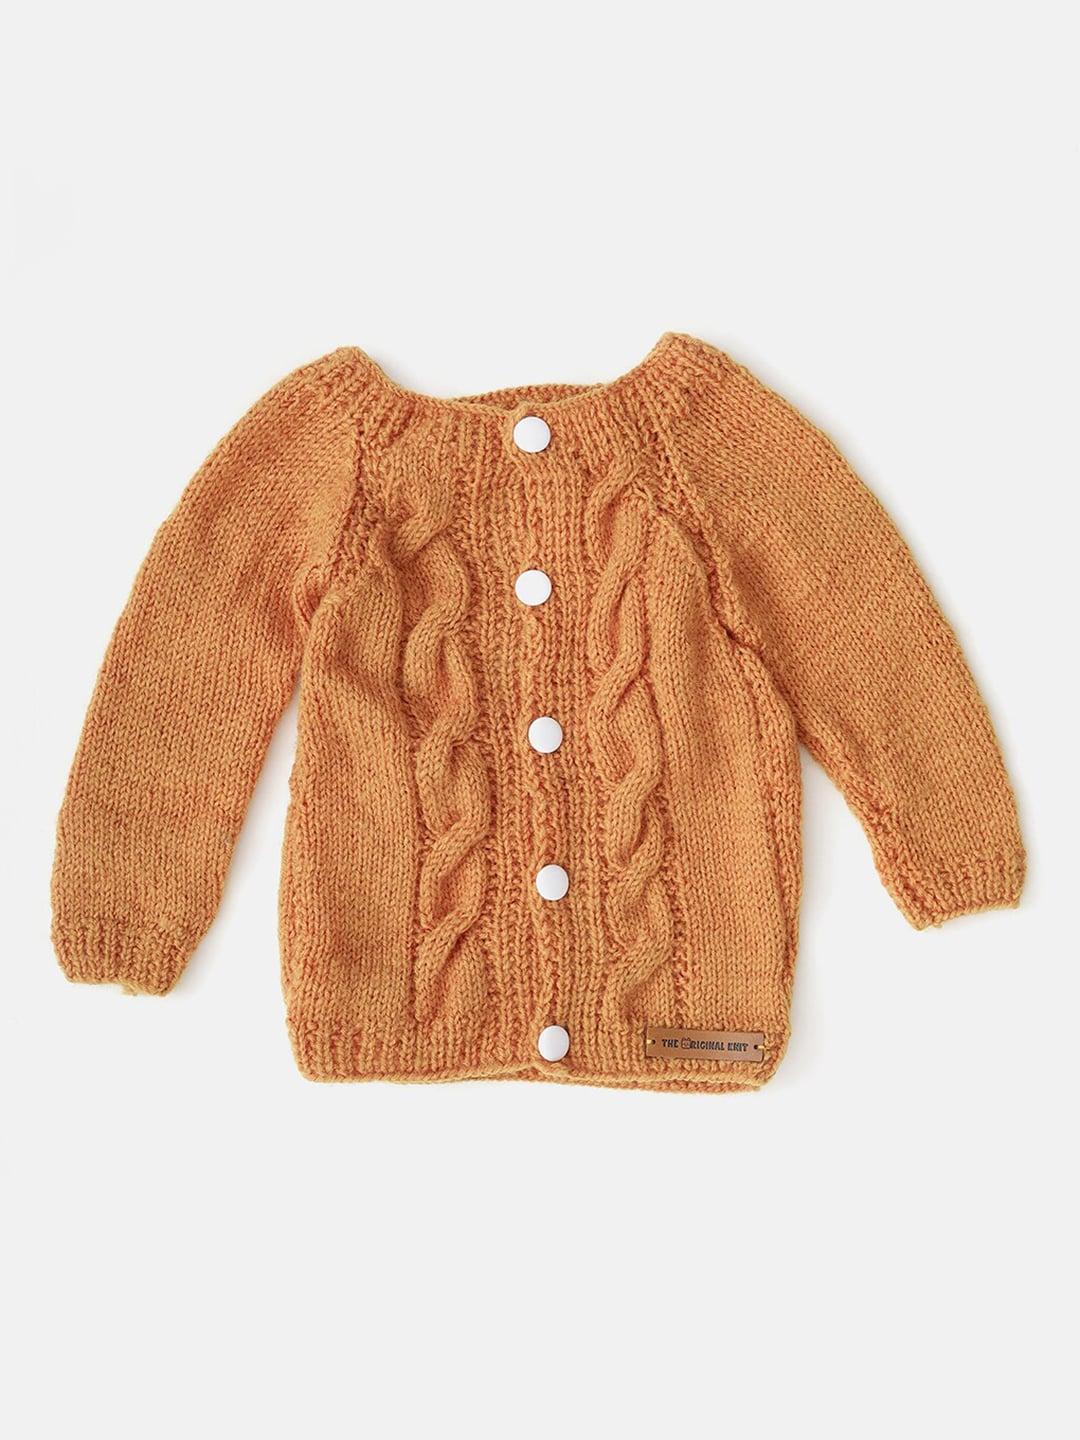 The Original Knit Infants Self Design Round Neck Button Detail Cardigan Sweaters